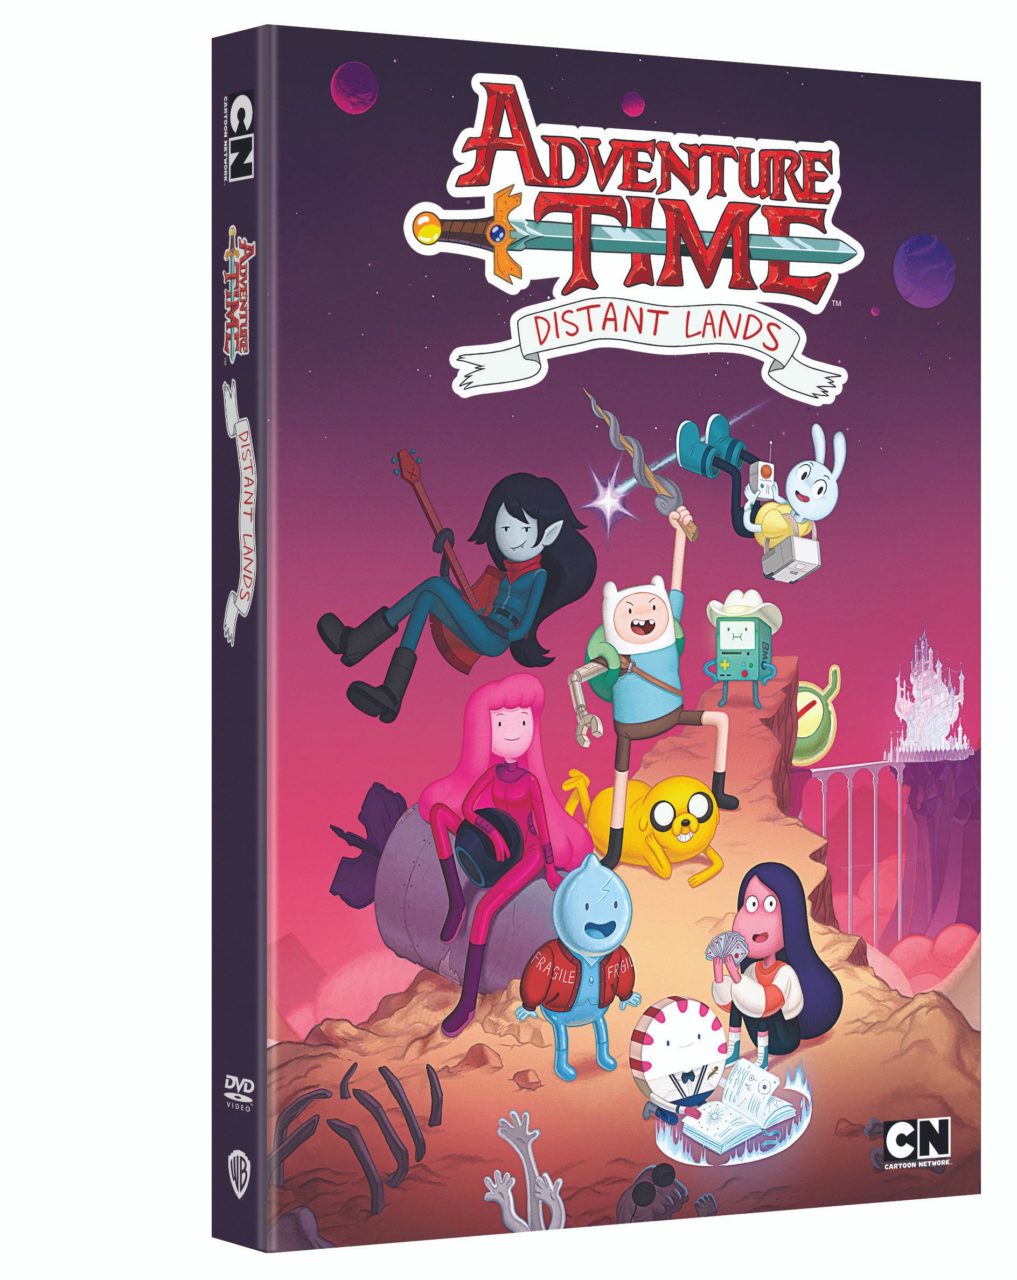 Adventure Time: Distant Lands DVD cover (Warner Bros. Home Entertainment/Cartoon Network)